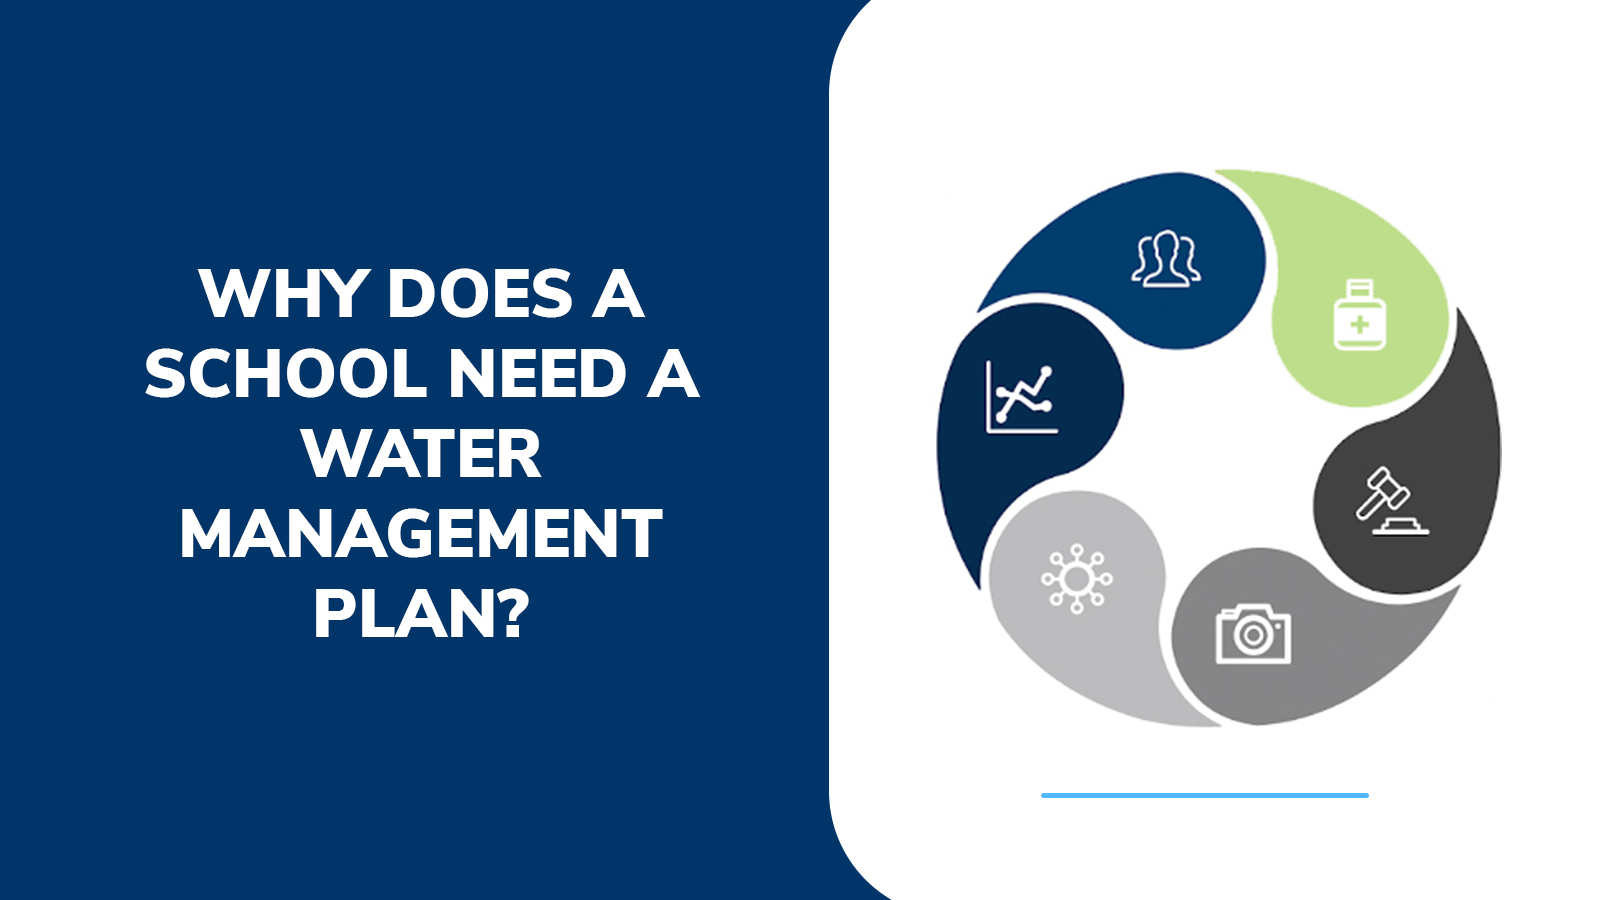 Why Does a School Need a Water Management Plan?